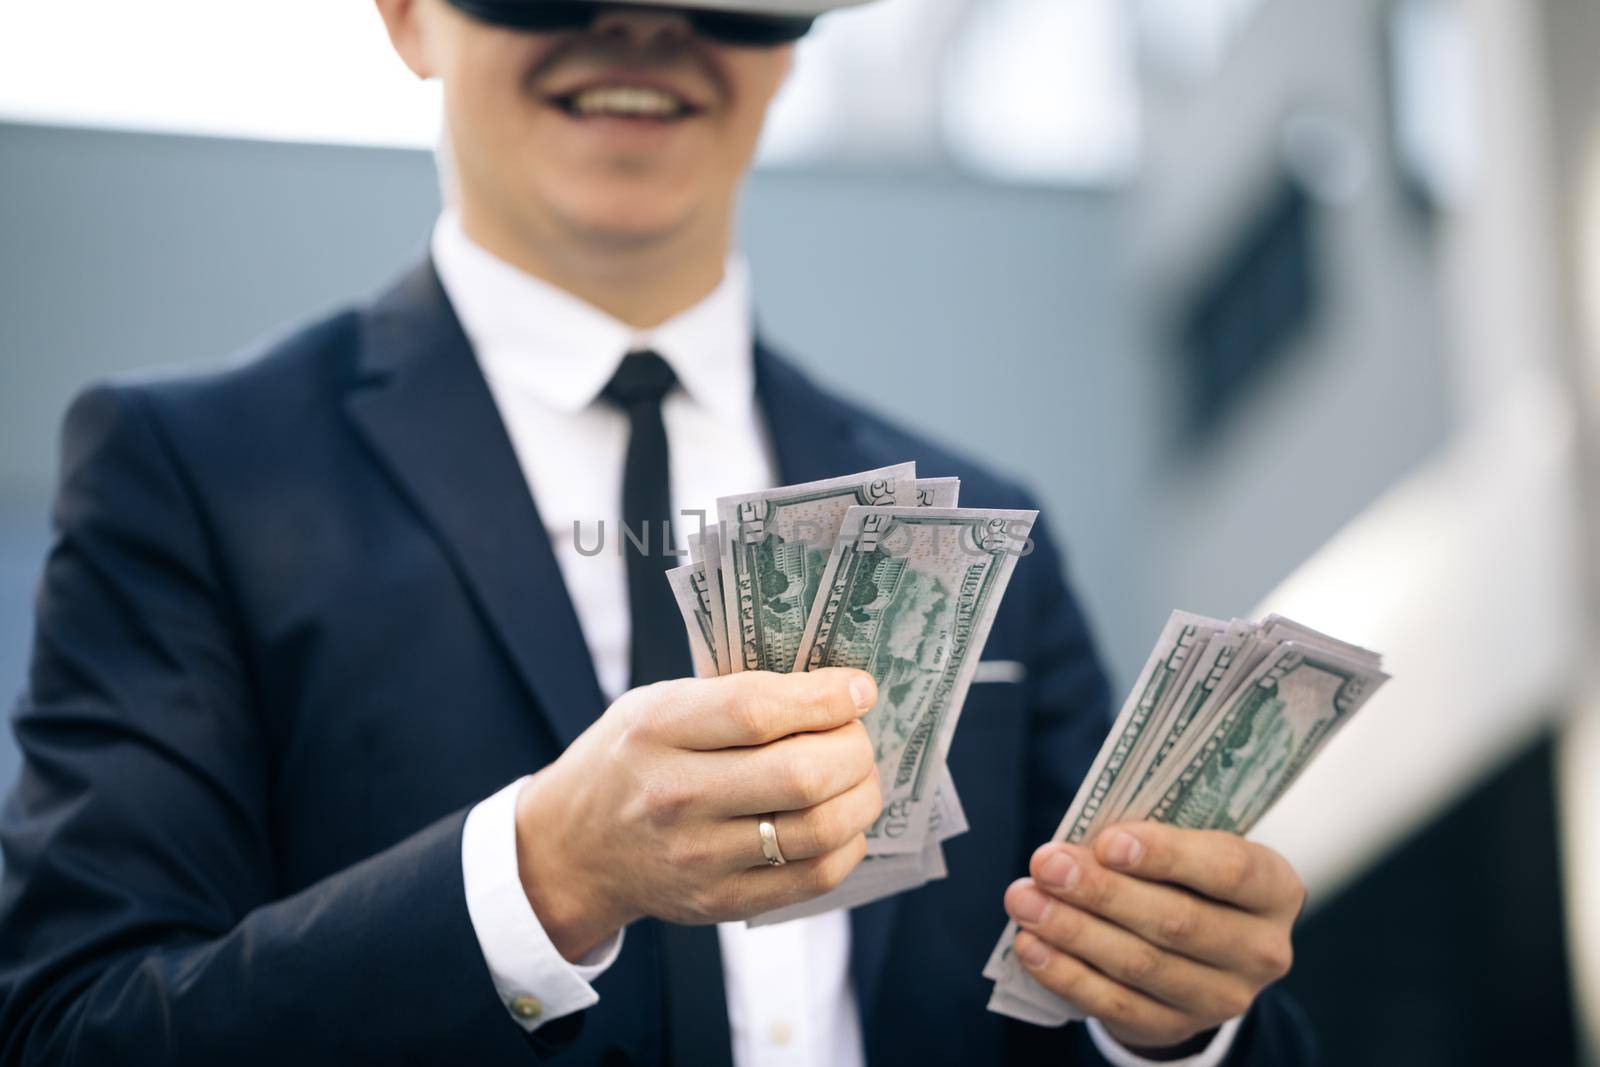 Rich man wearing VR headset counting money and smiling. Young businessman standing with pack of dollars. Richness and success concept. New technology offers new 3D dimensions